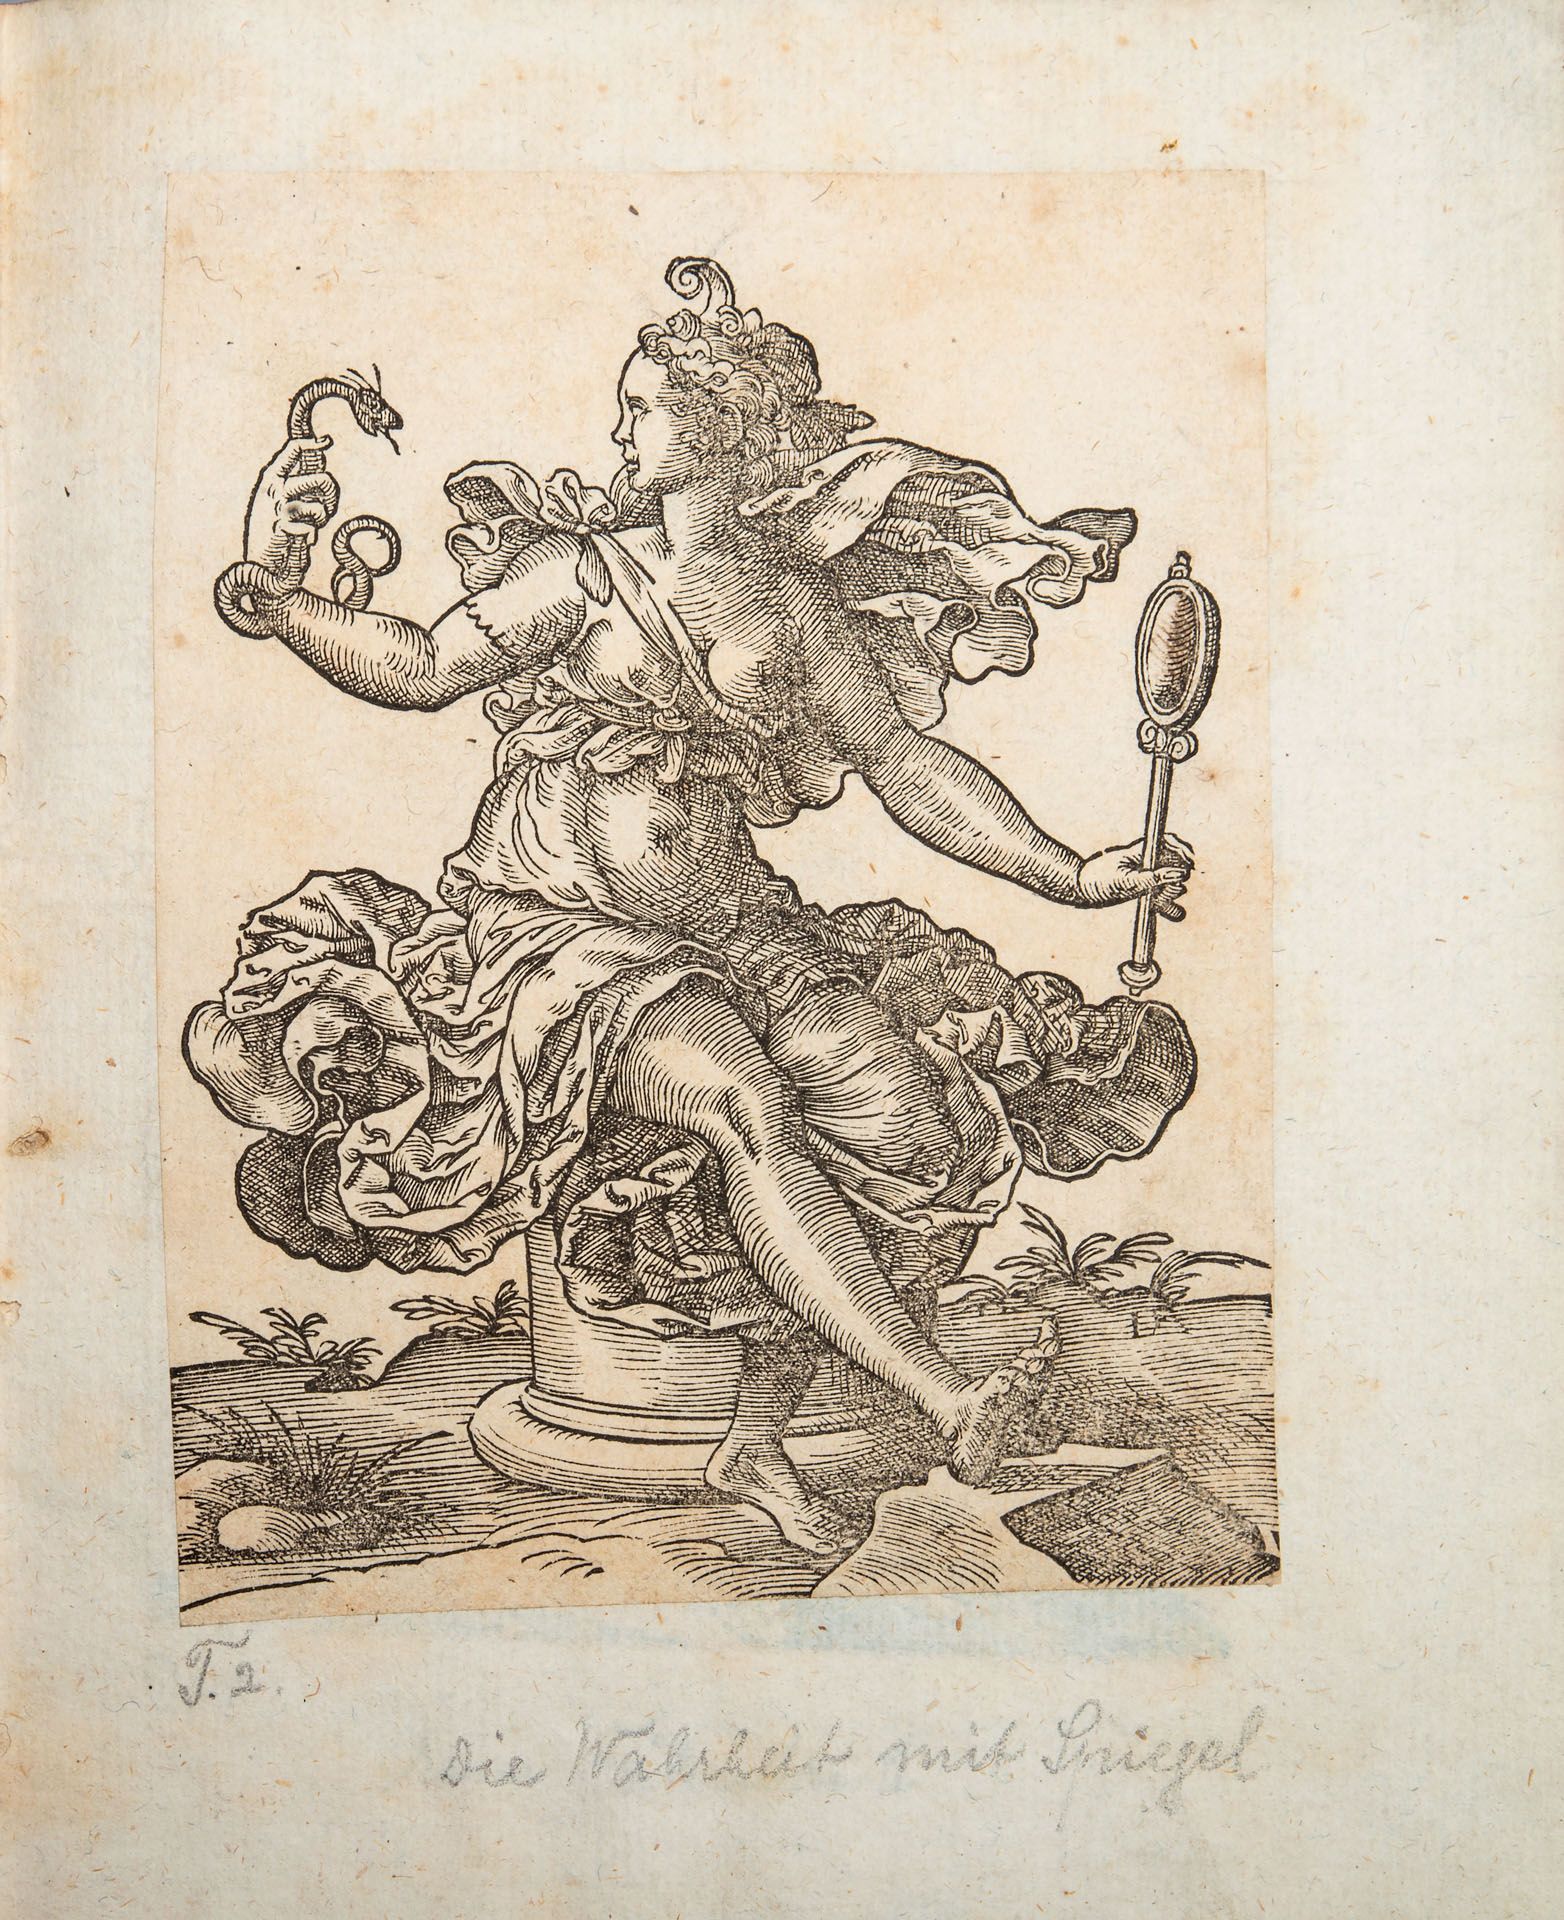 Jost Amman (1539-1591), An Album of 32 Original Engraving from the 16th Century